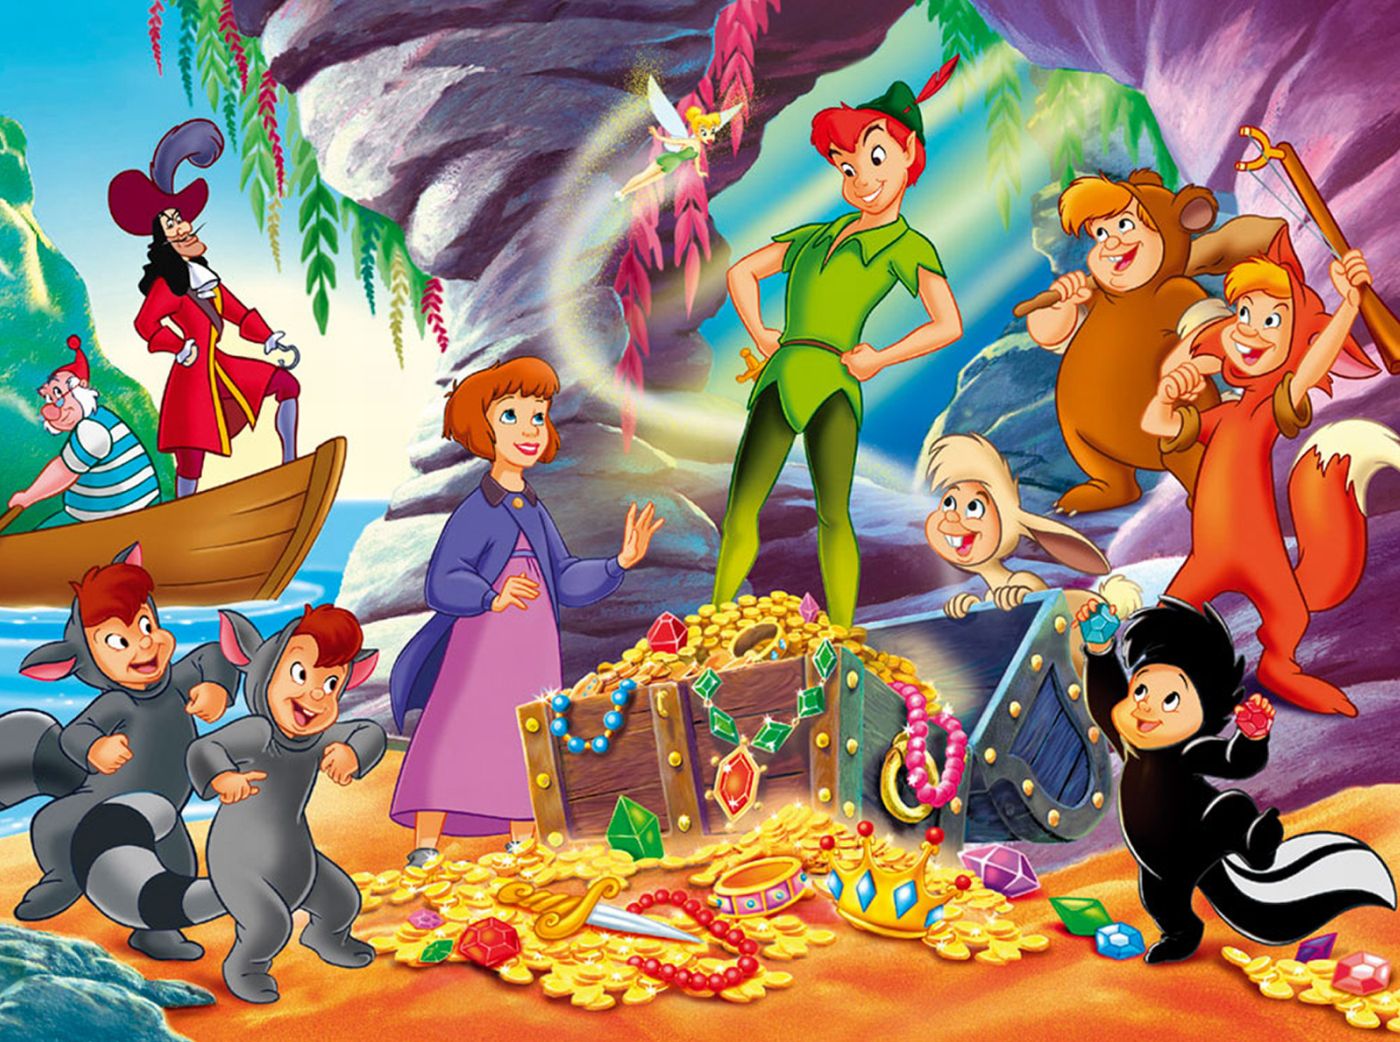 Download original wallpaper with Disney characters Peter Pan, Wendy, Captain Hook, Tinkerbell, Mr. Smee, The Lost Boys, Cubby, Nibs, The Twins, Slightly